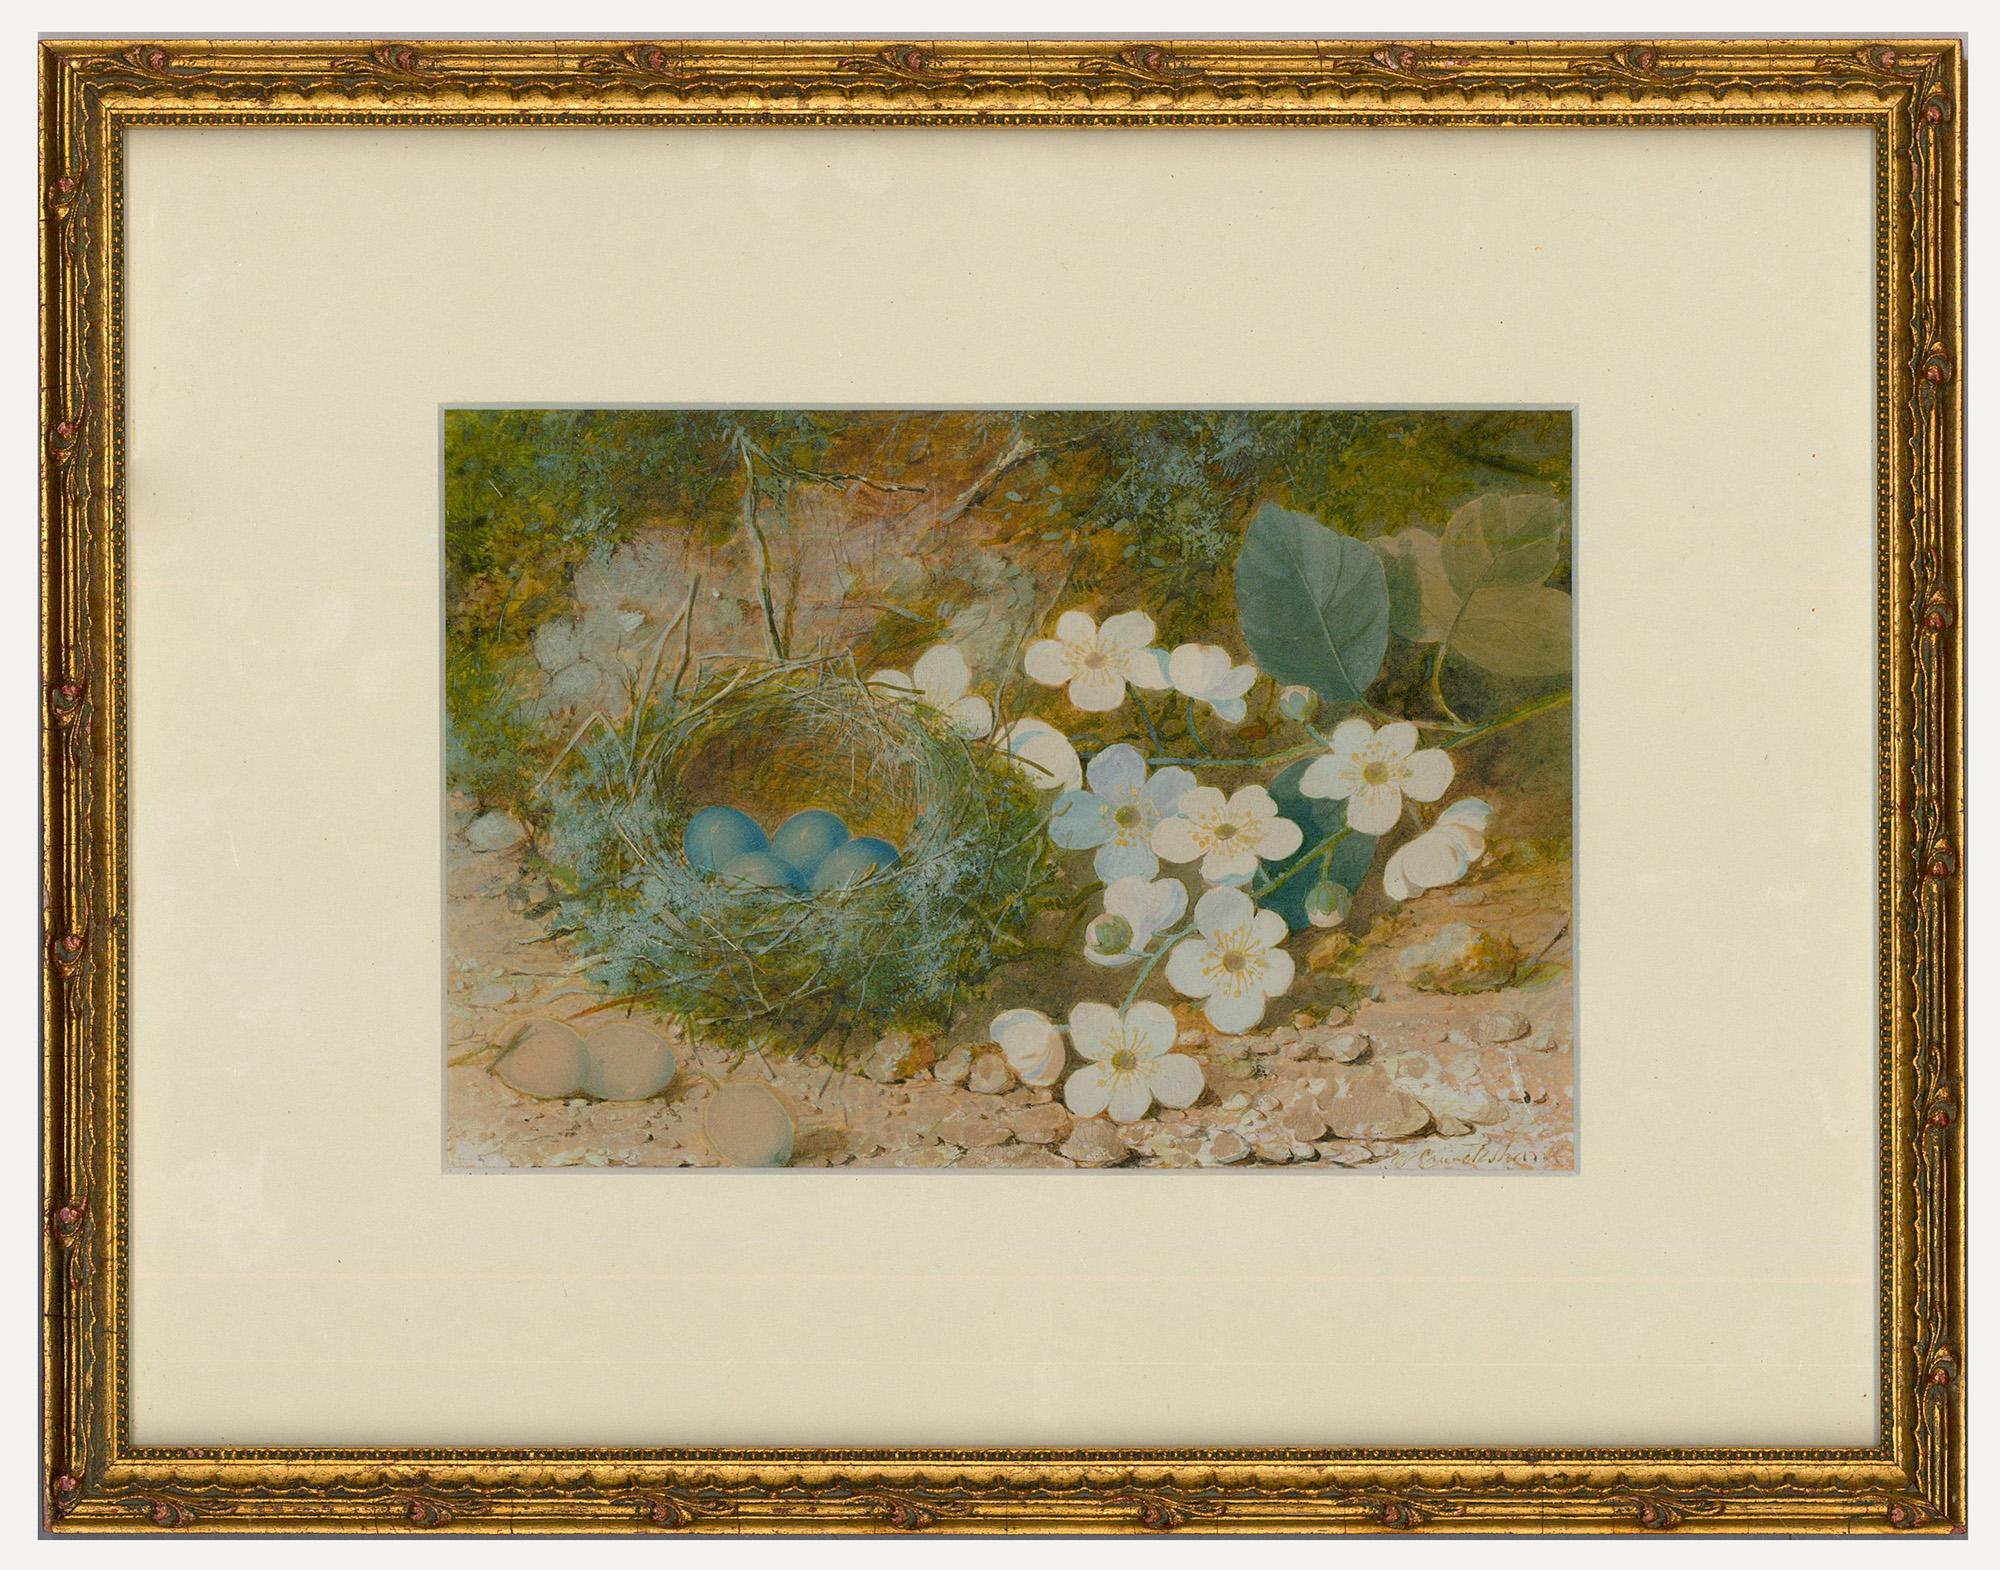 A fine watercolour study depicting a nest of hedge sparrow eggs with cherry blossom . The artist uses an expert hand to capture the fine details of the intricate birds nest and delicate blossoms. Signed to the lower right. Presented in a gilt frame.